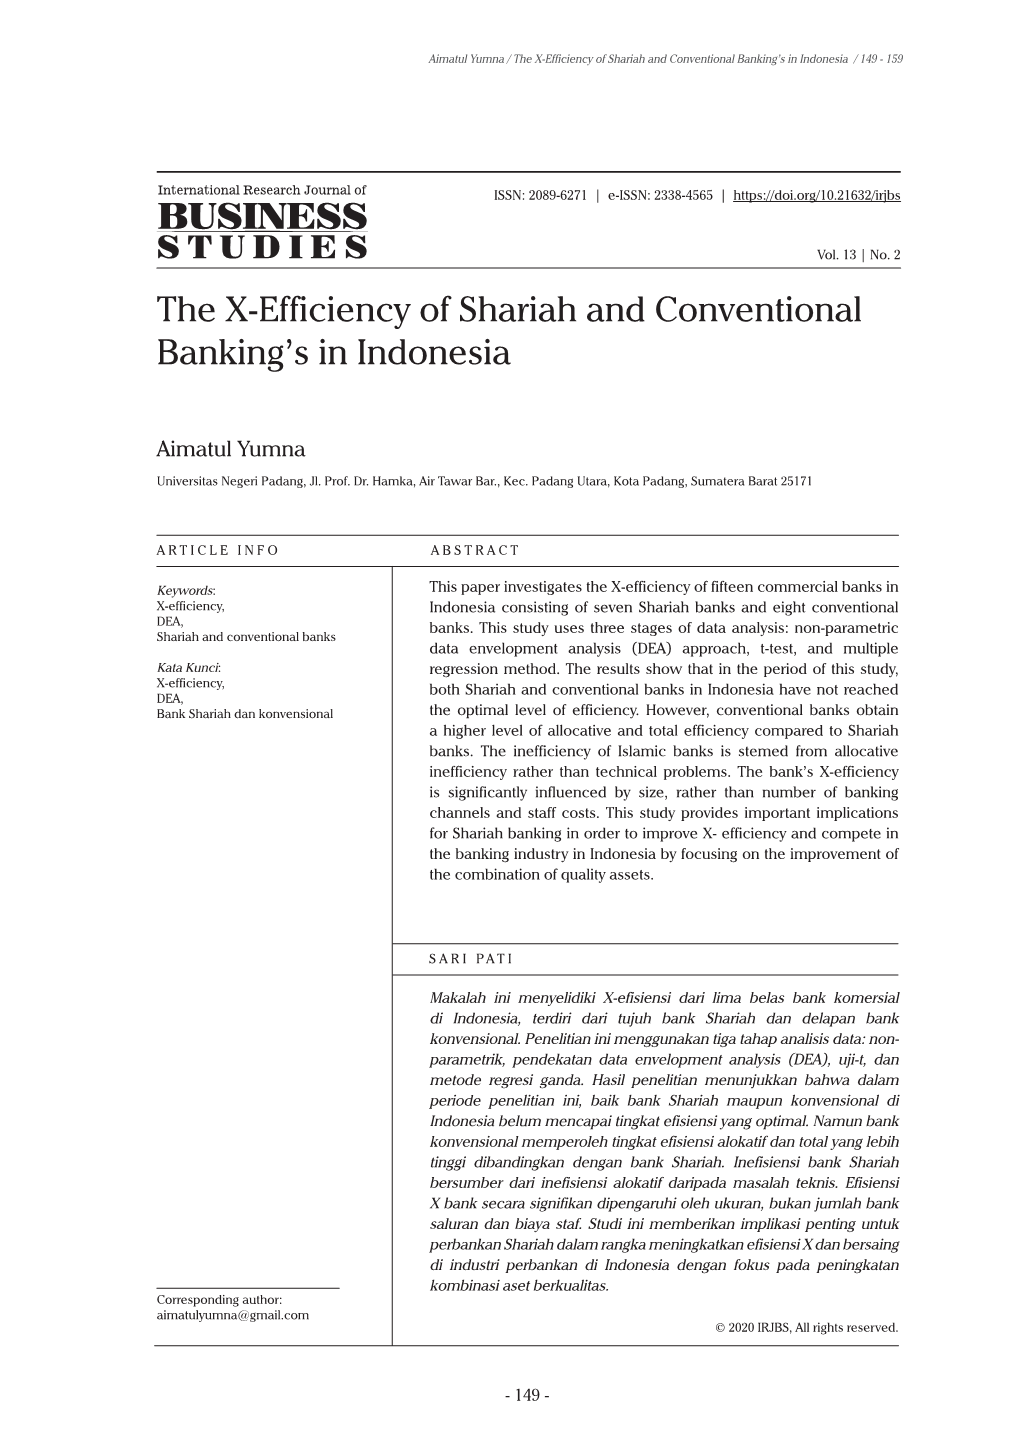 The X-Efficiency of Shariah and Conventional Banking's in Indonesia